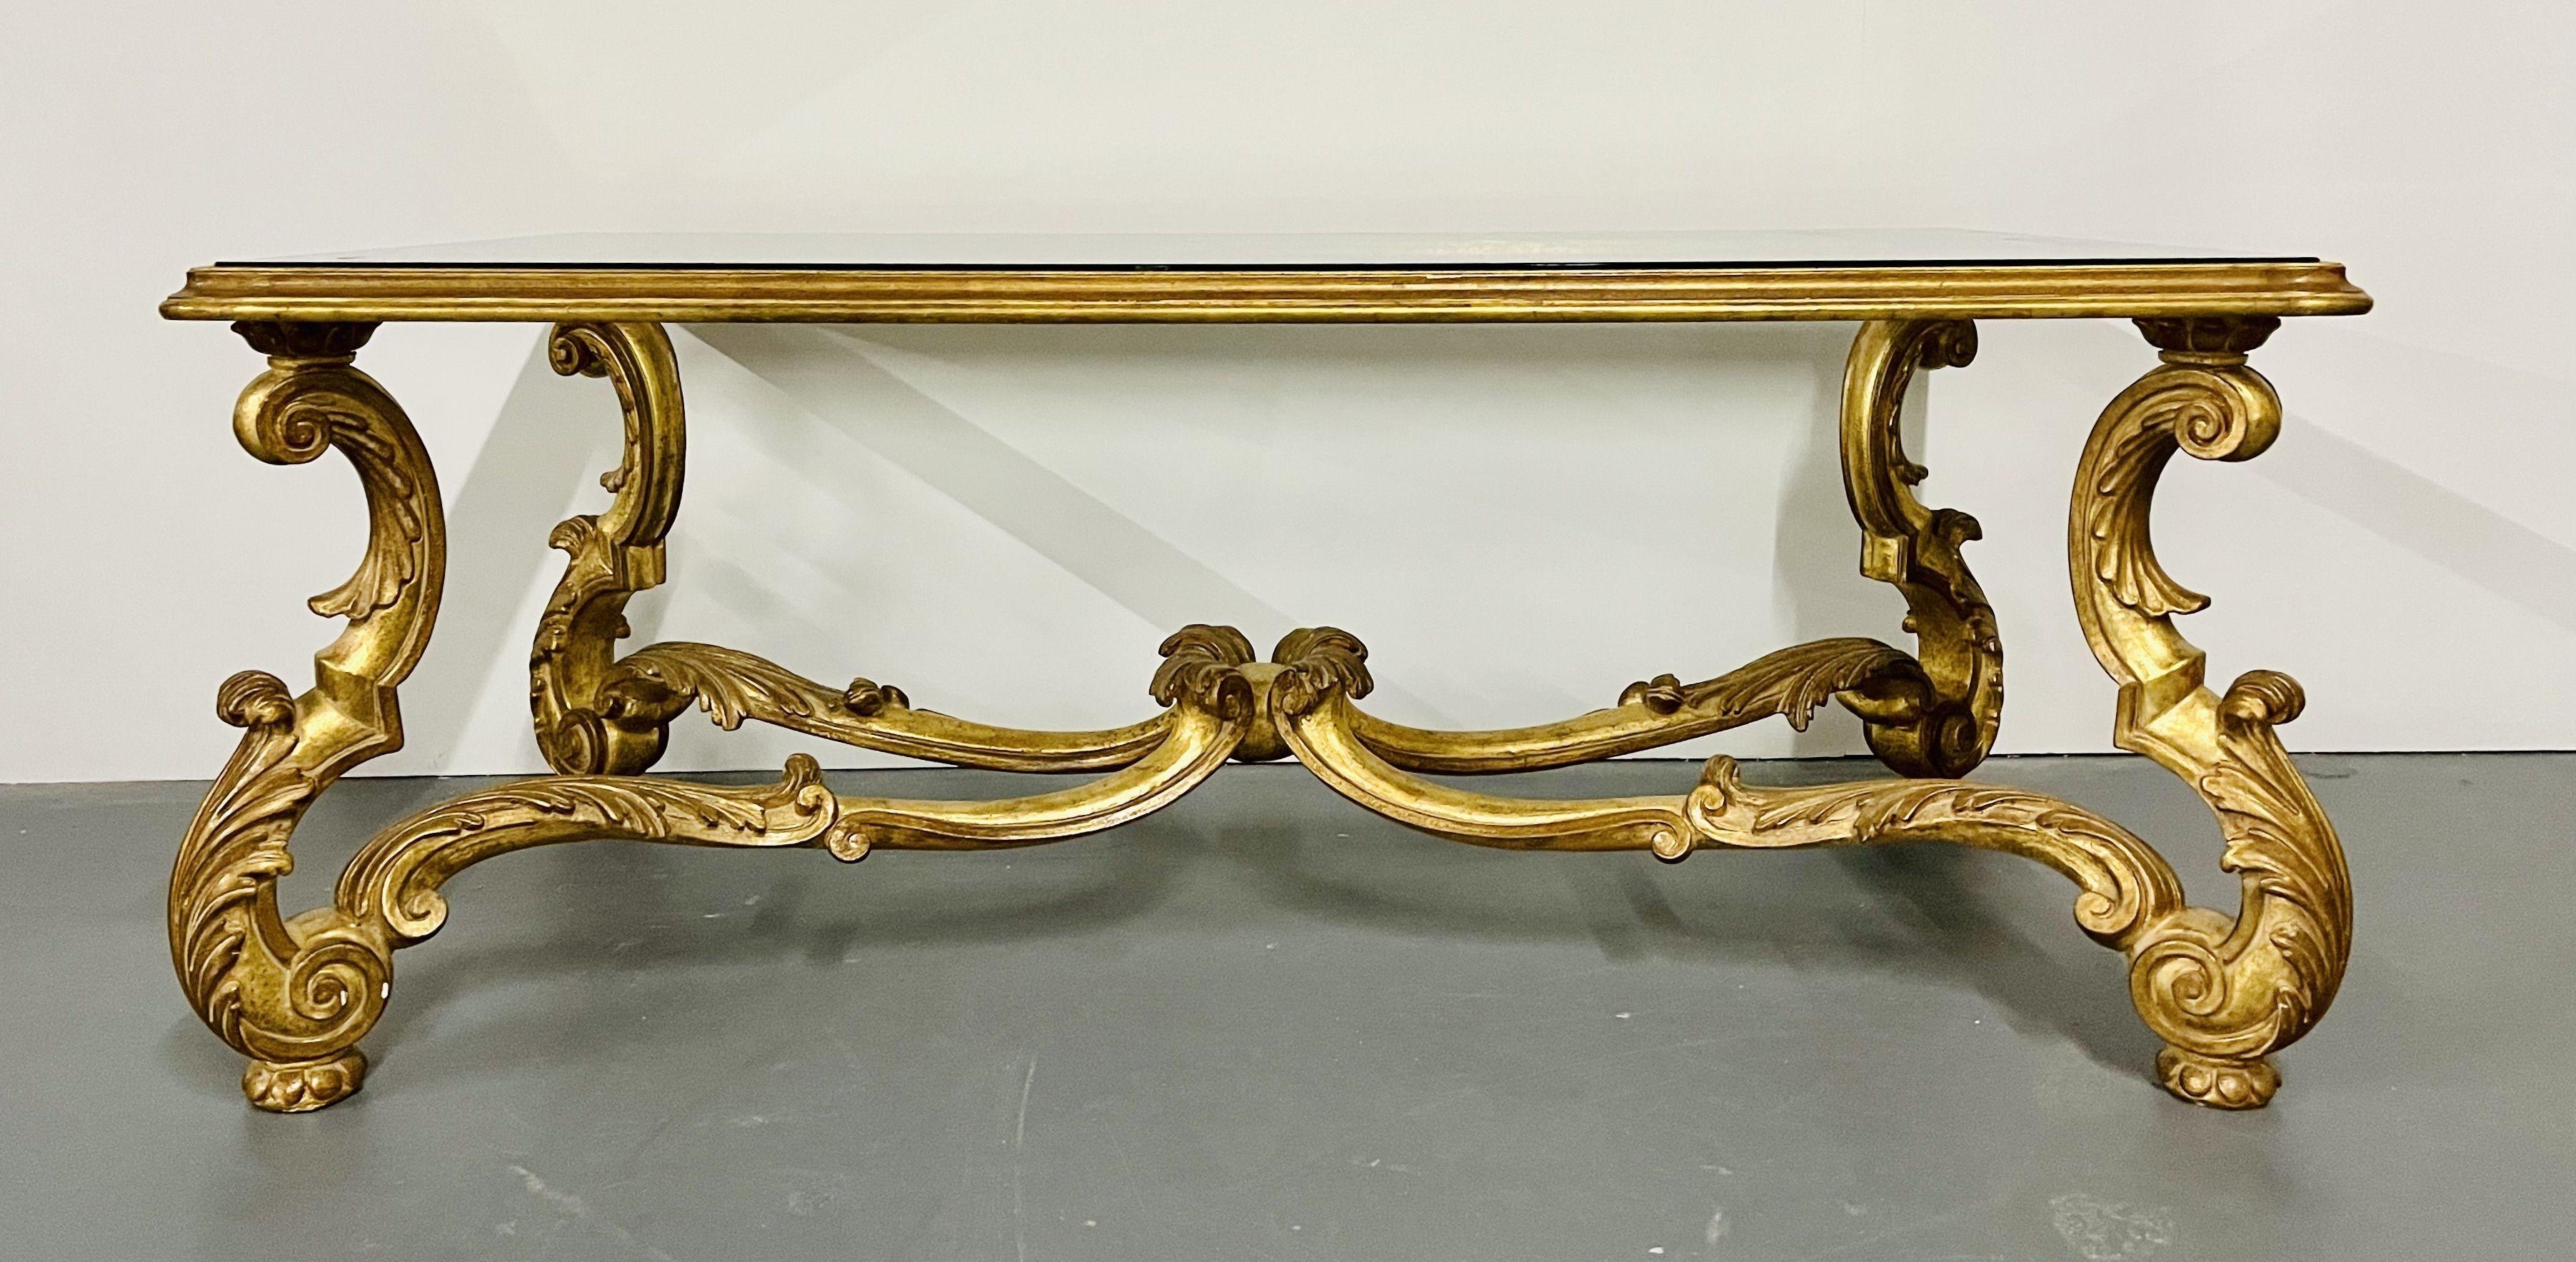 An Italian carved glass top coffee, cocktail table, gilt wood, Hollywood Regency, Mid-Century Modern. This fine custom made table is 22 kt gilt over wood with wonderful Rococo carvings having a glass top that sits inside the frame of the